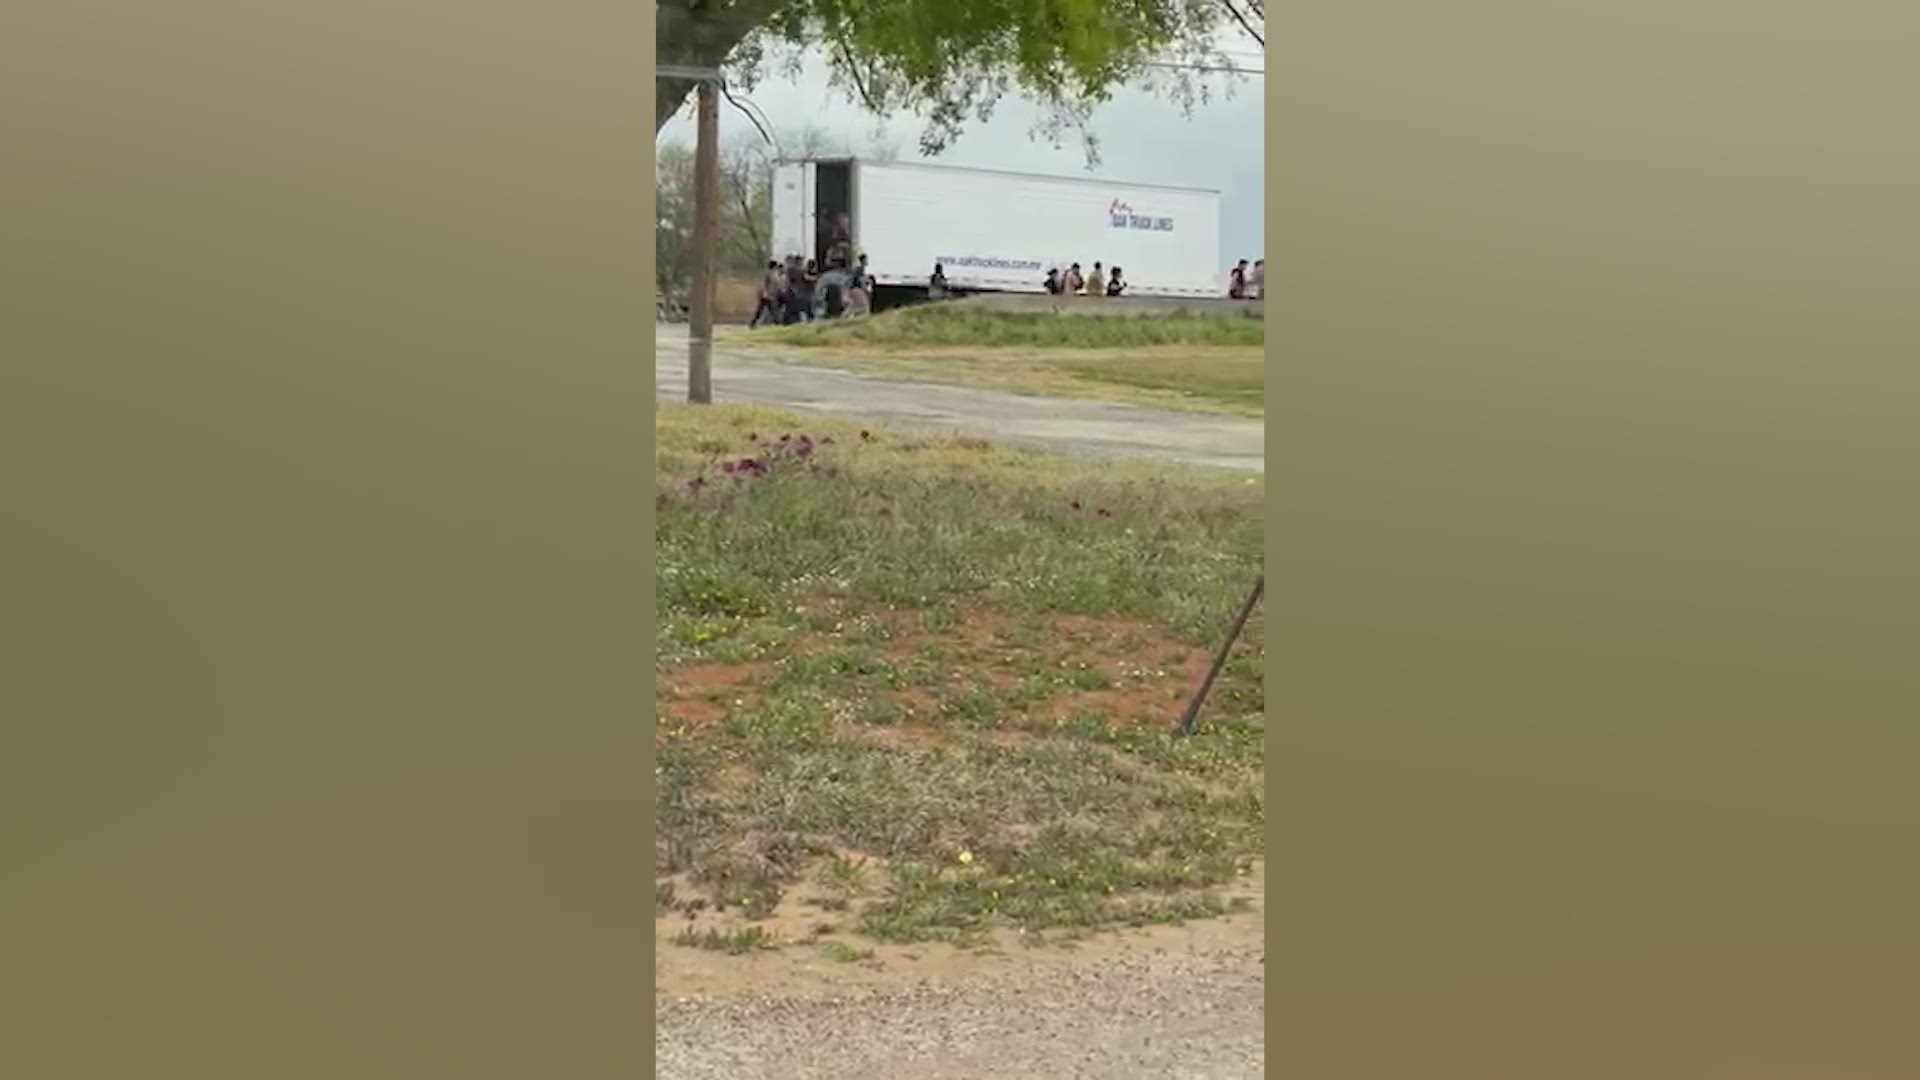 The Frio County Sheriff's Office told KENS 5 65 migrants were apprehended around noon Monday.